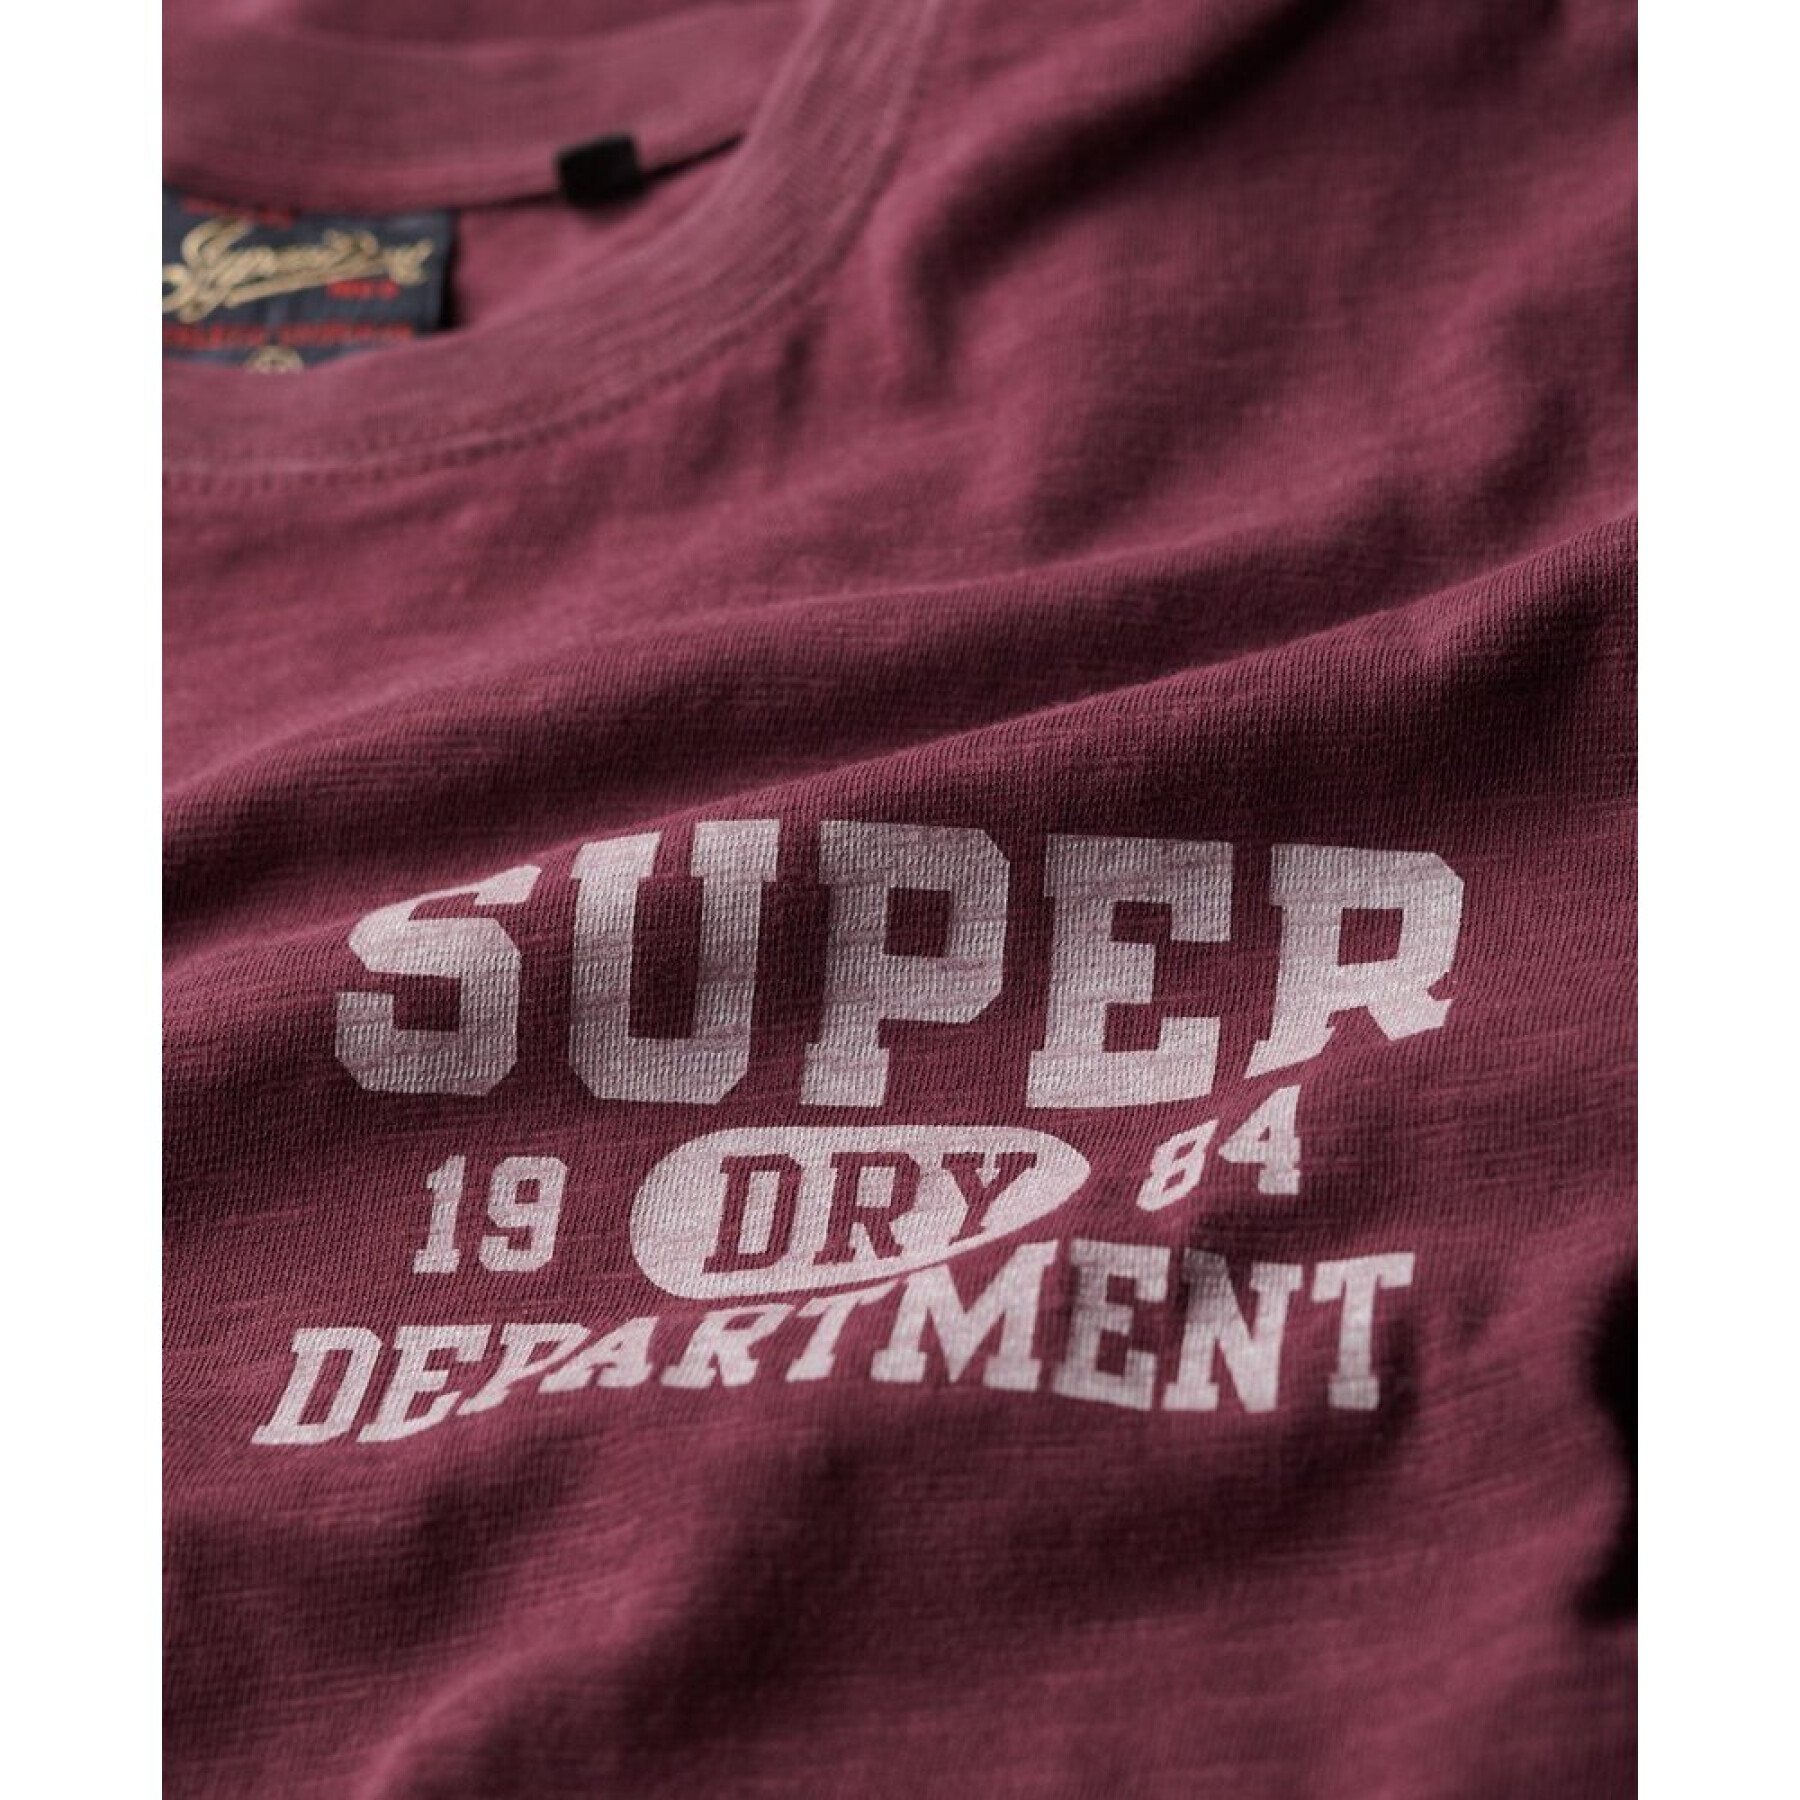 T-Shirt Superdry Athletic College